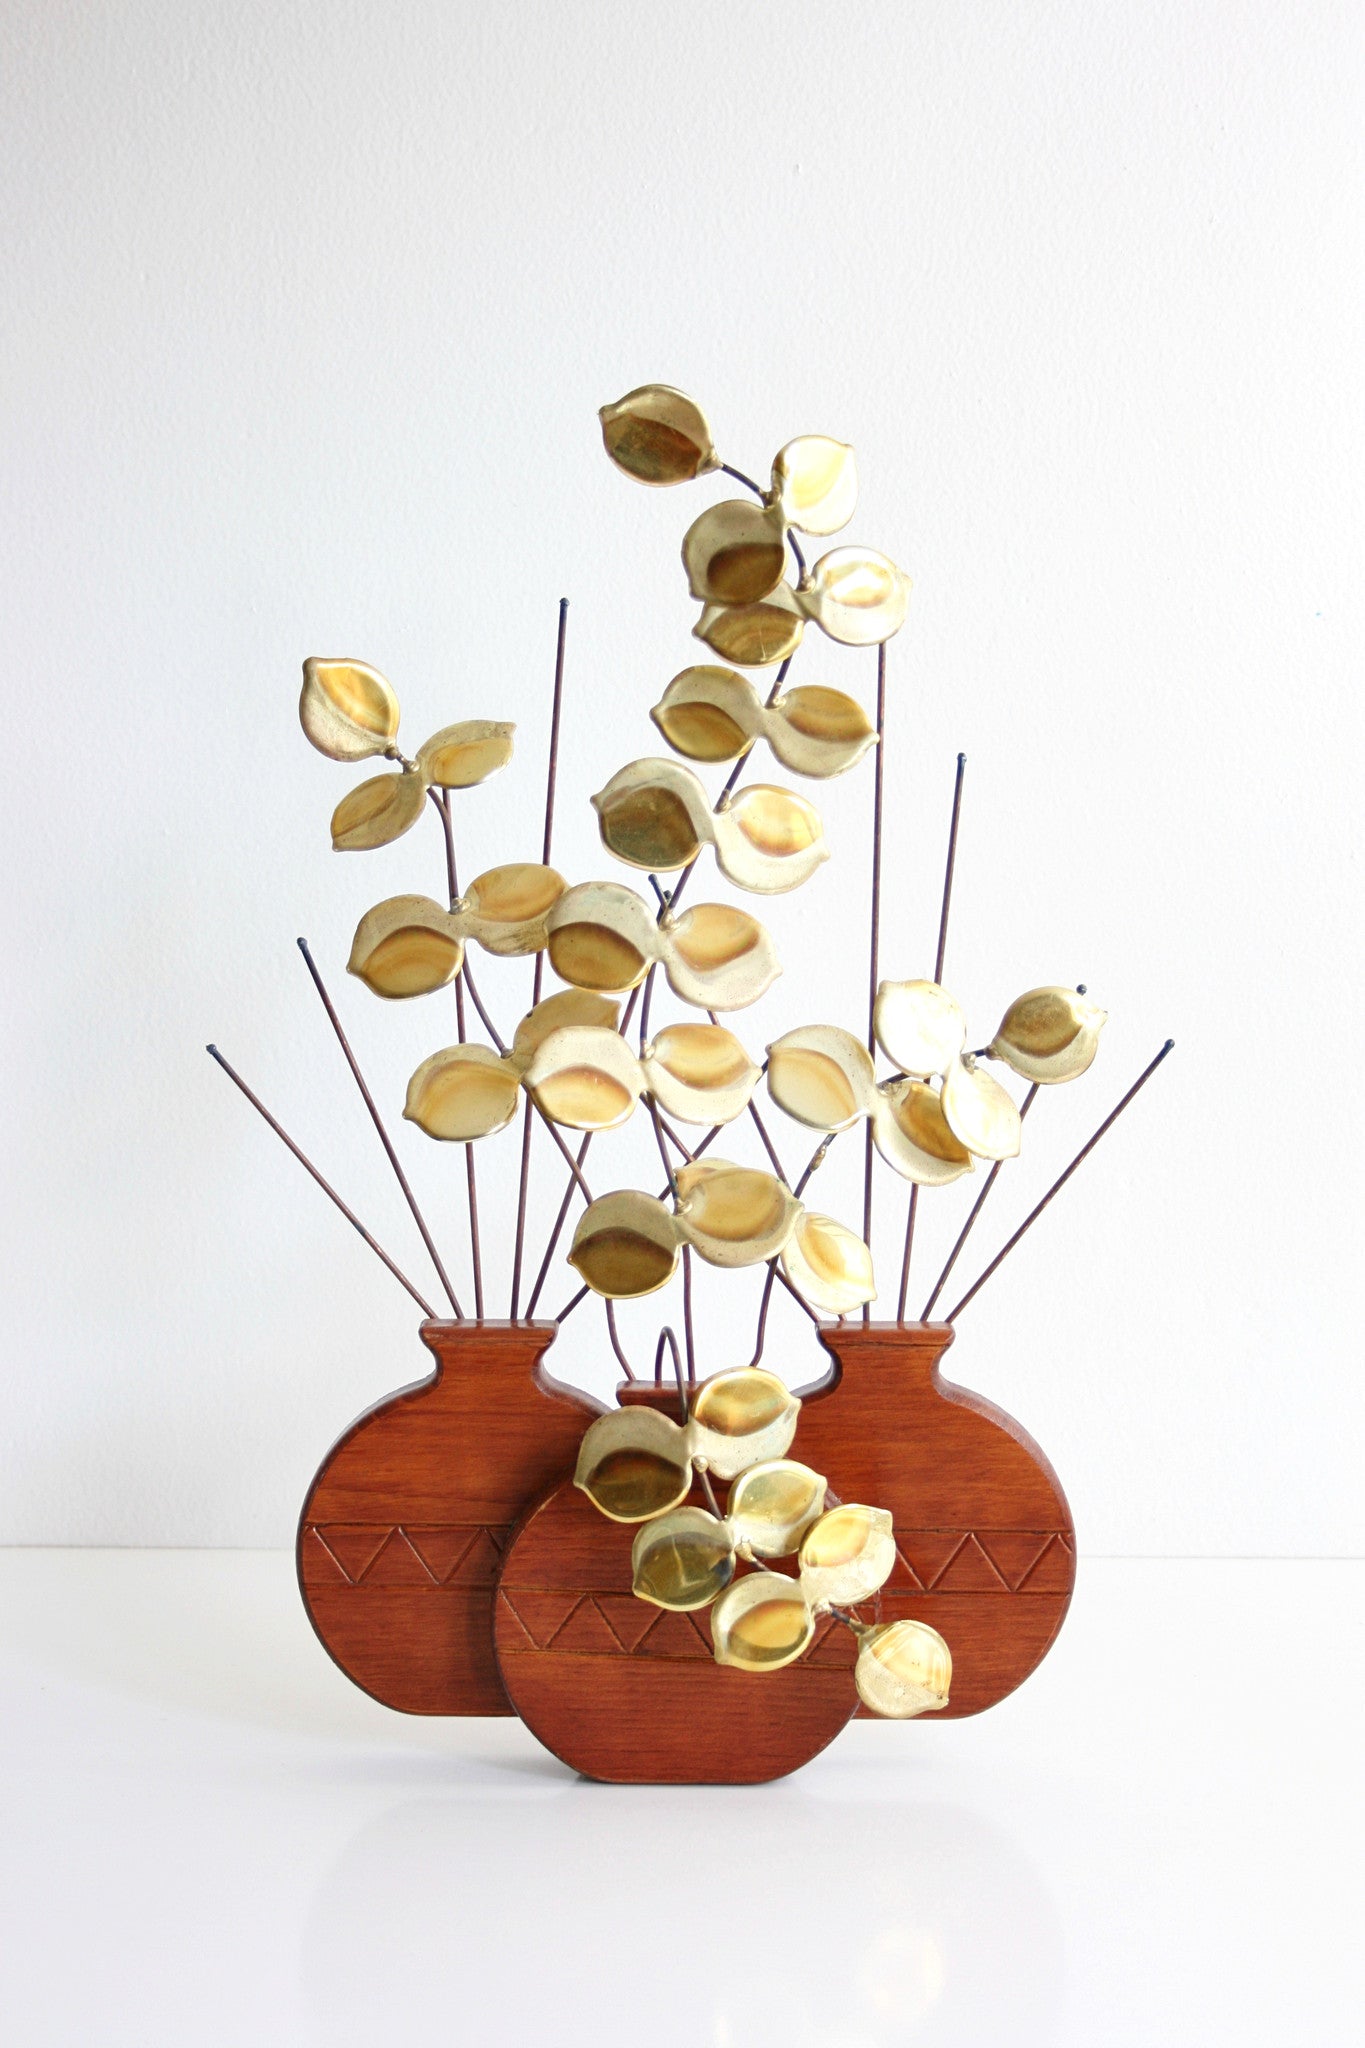 SOLD - Mid Century Modern Wood and Brass Plant Wall Hanging / Vintage Brass Plant Sculpture